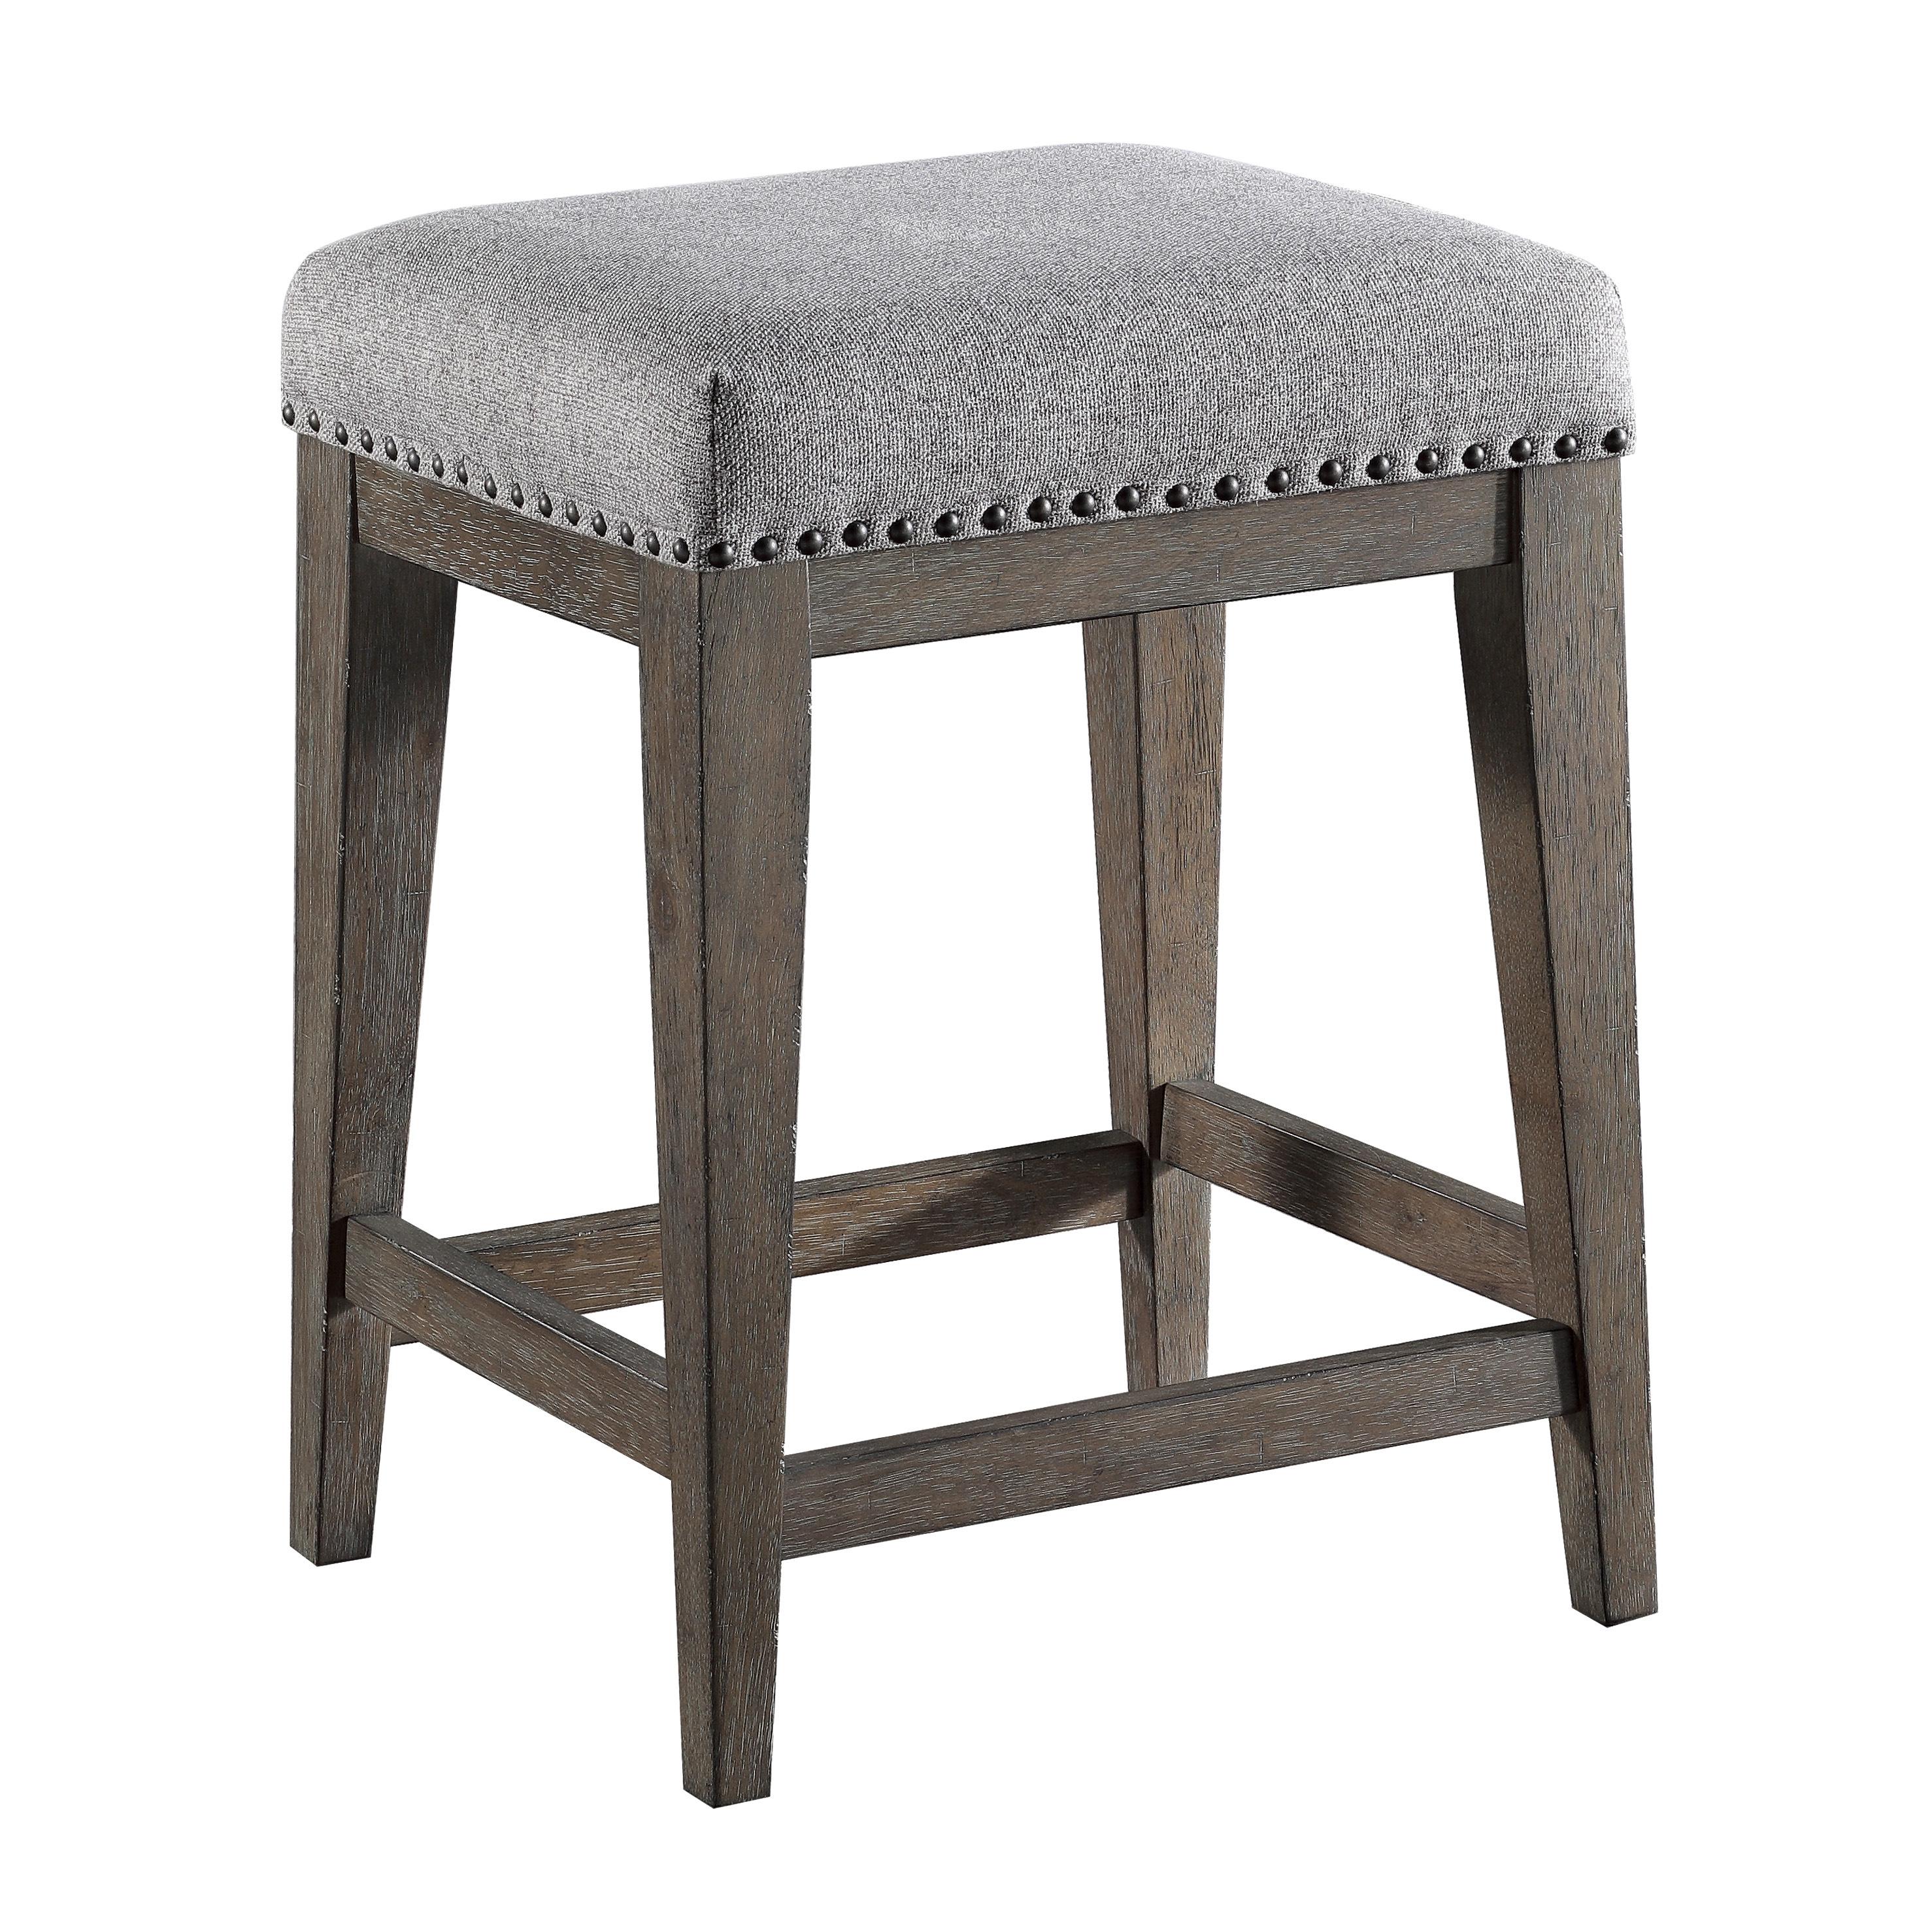 Transitional Counter Height Stool 5441-24ST Sarasota 5441-24ST in Brown Polyester